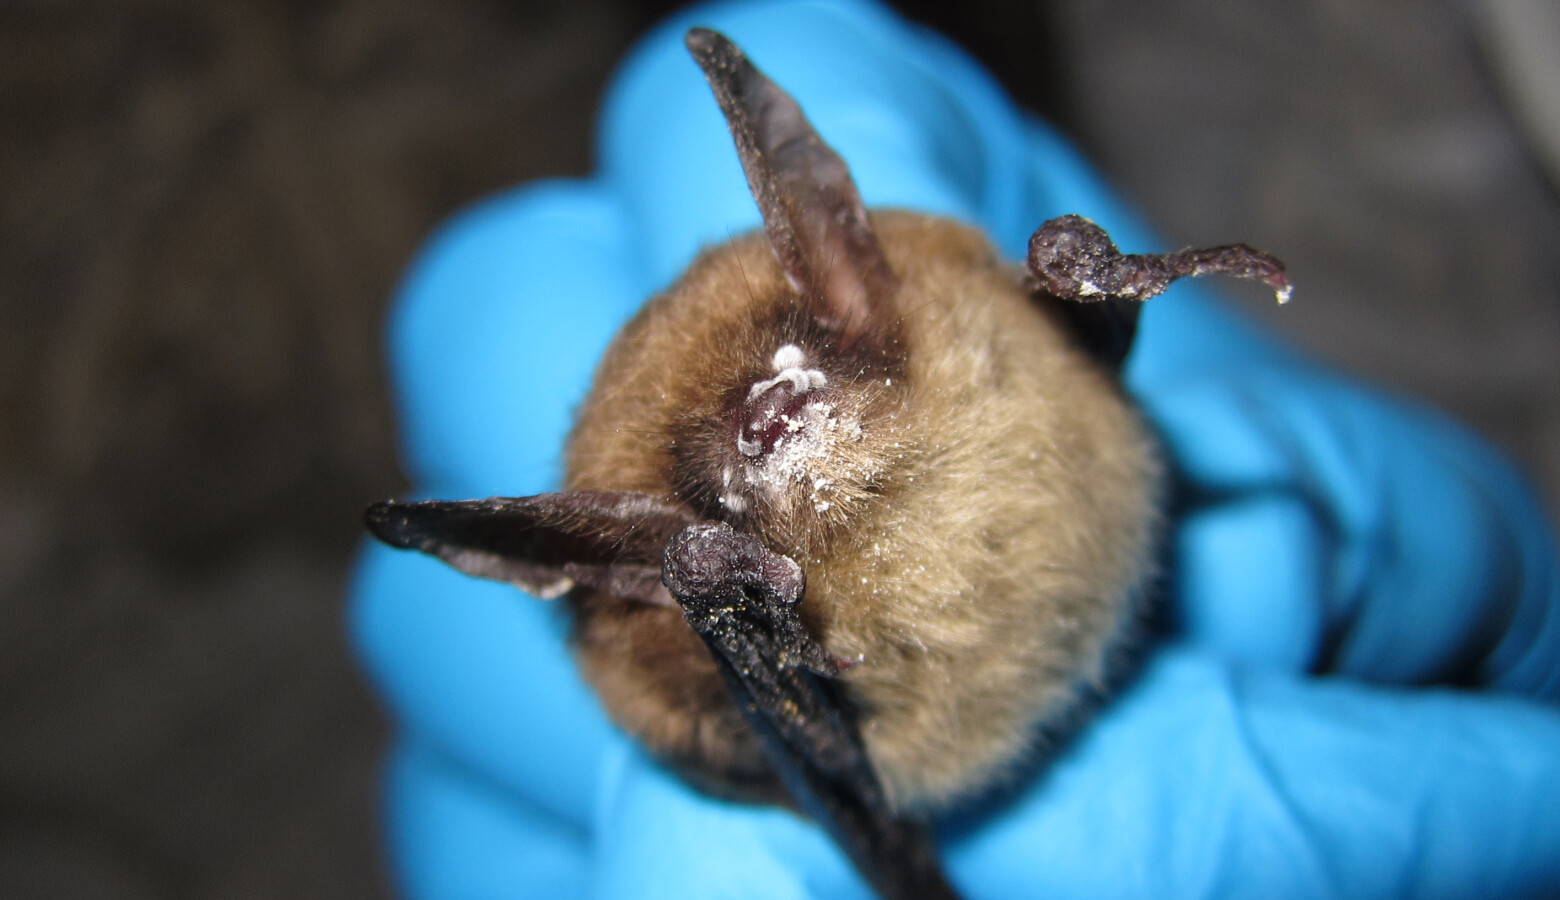 A northern long-eared bat in Illinois with visible symptoms of white nose syndrome, 2013. (Steve Taylor/University of Illinois)